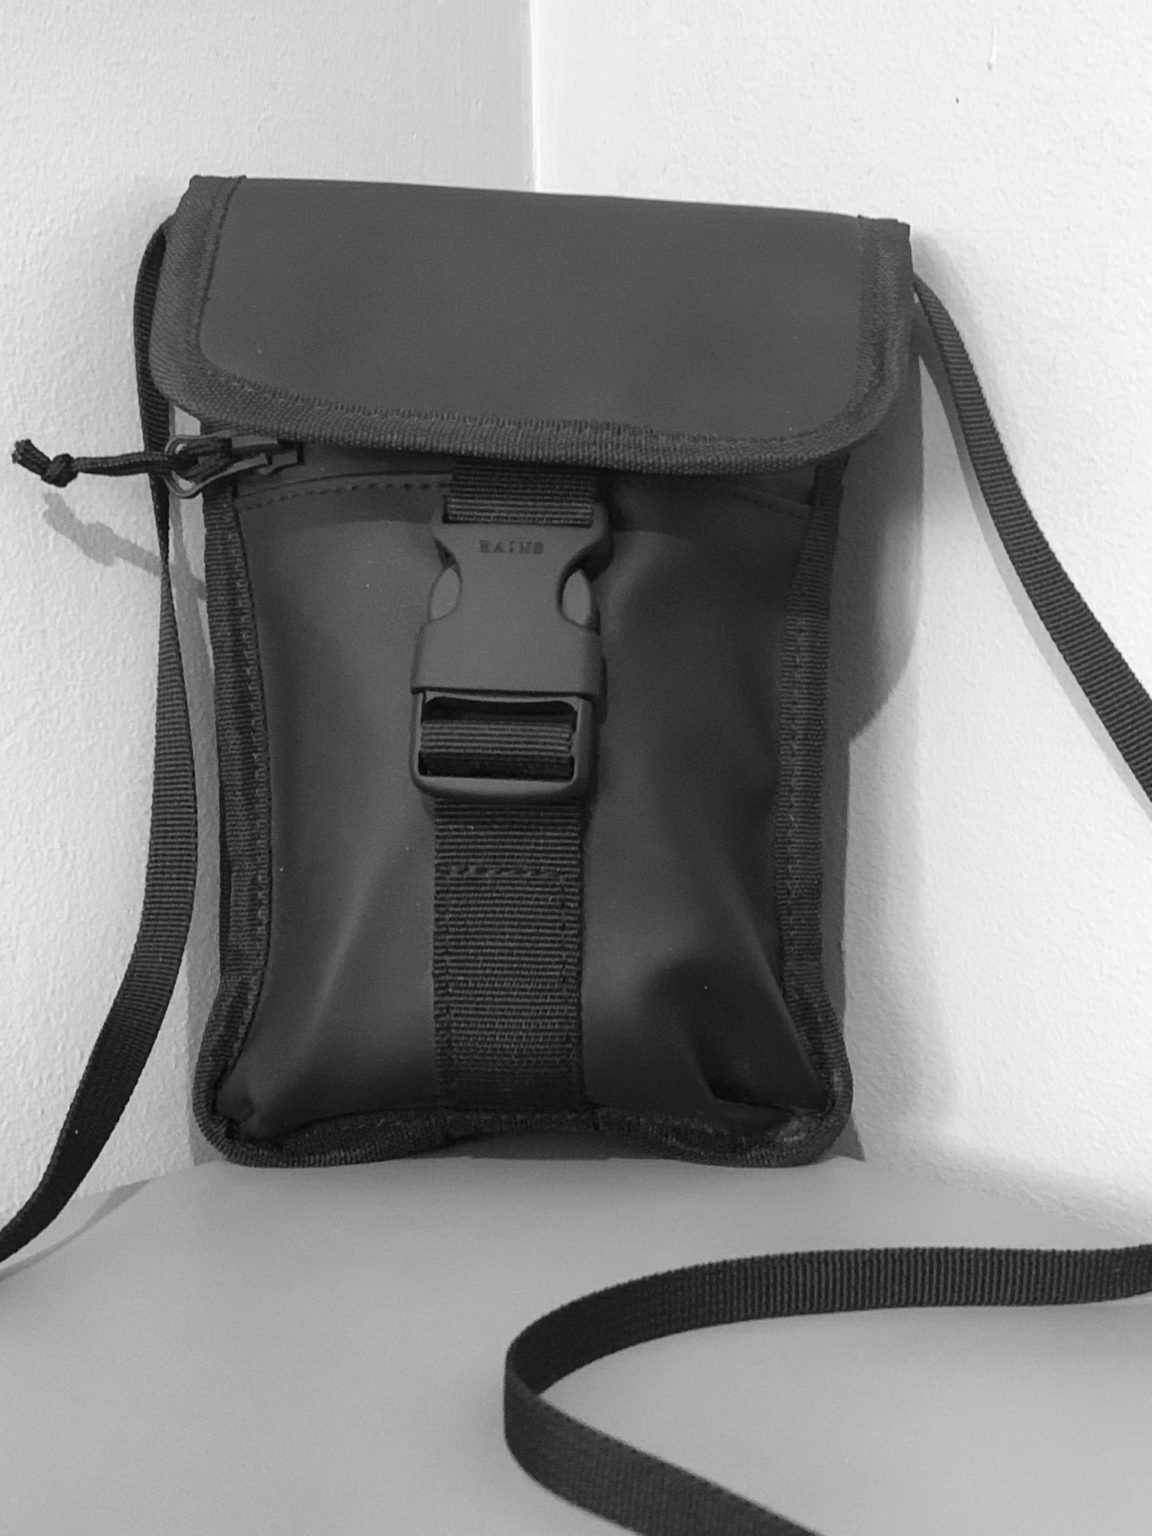 Don't Put It in Your Pocket! Why You Should Get a Rainproof Pouch